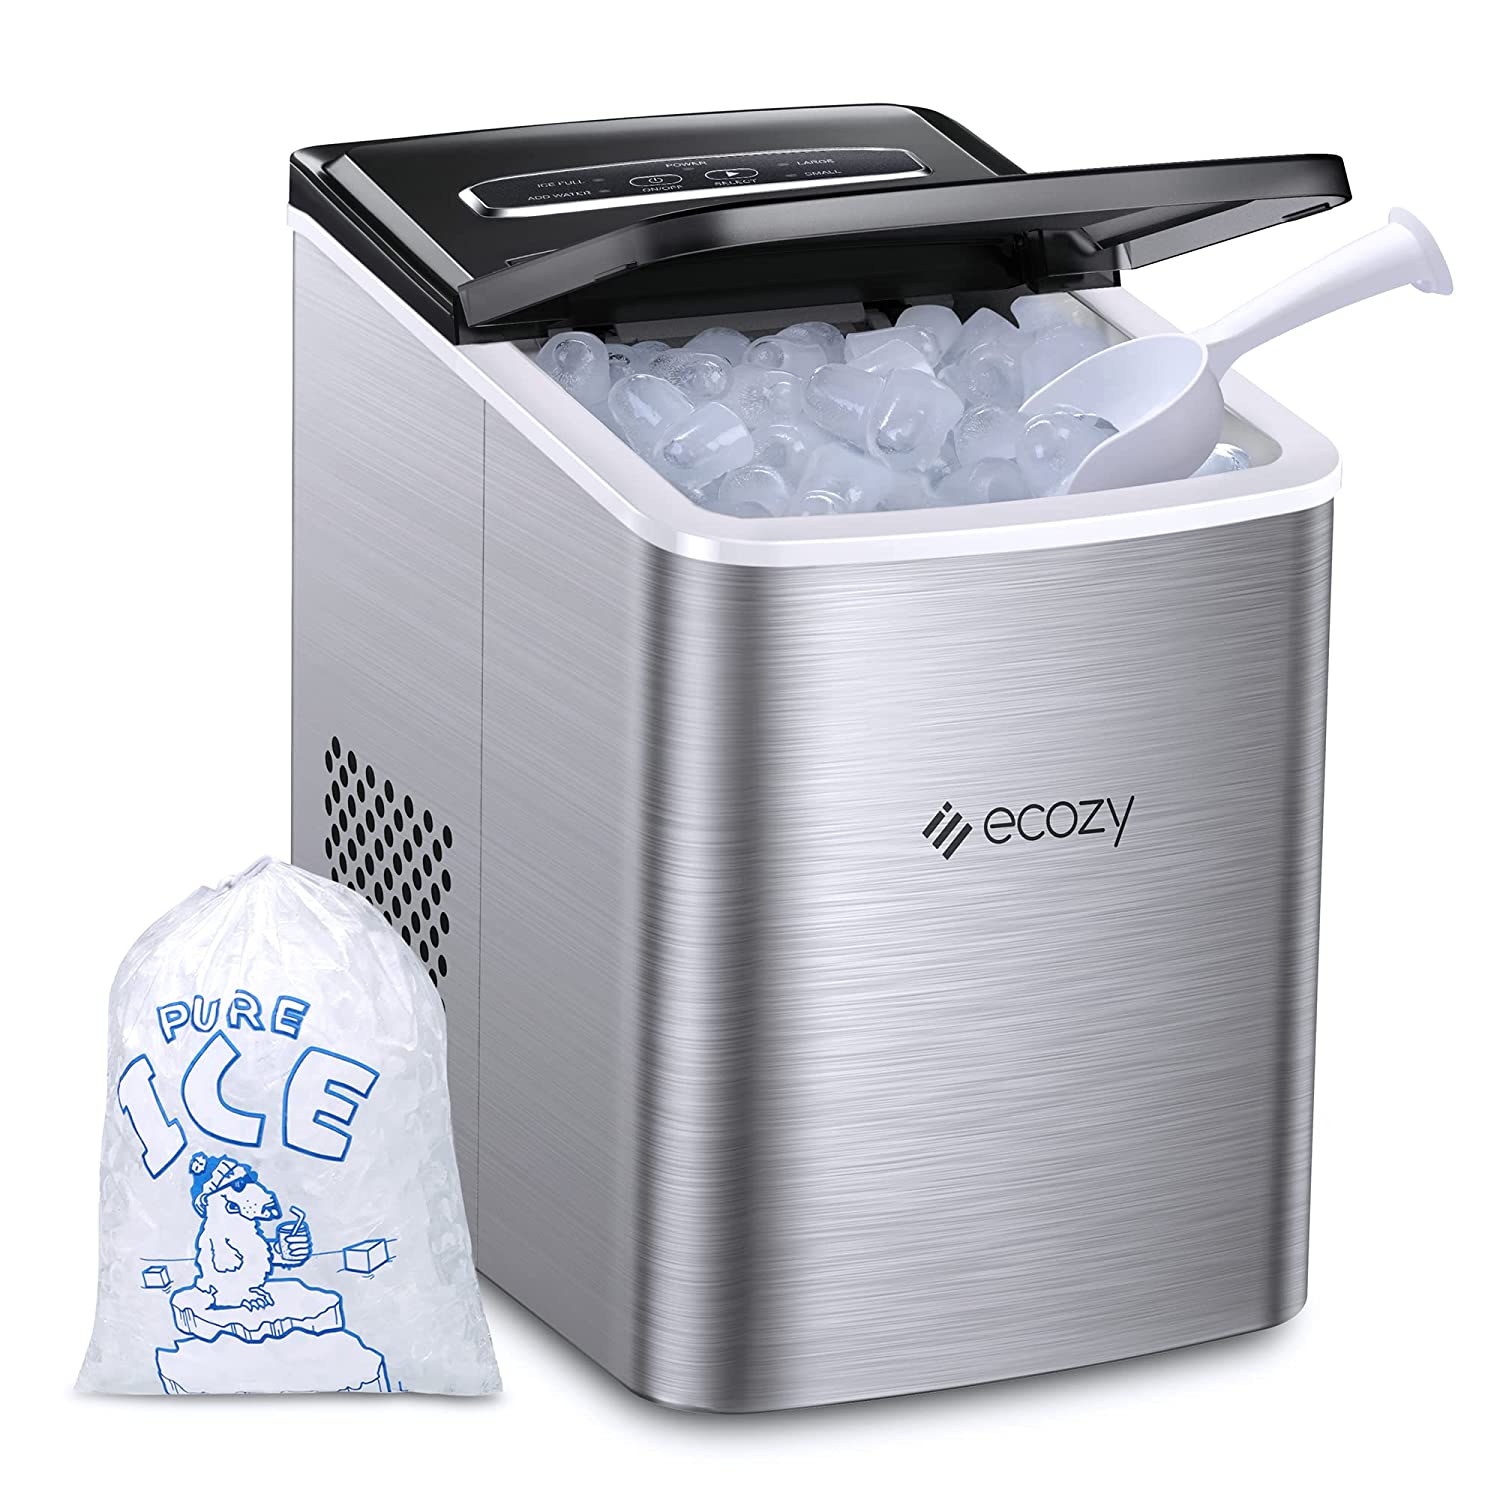 Today Only: Ecozy Ice Maker Portable Dishwasher Up to 31% off